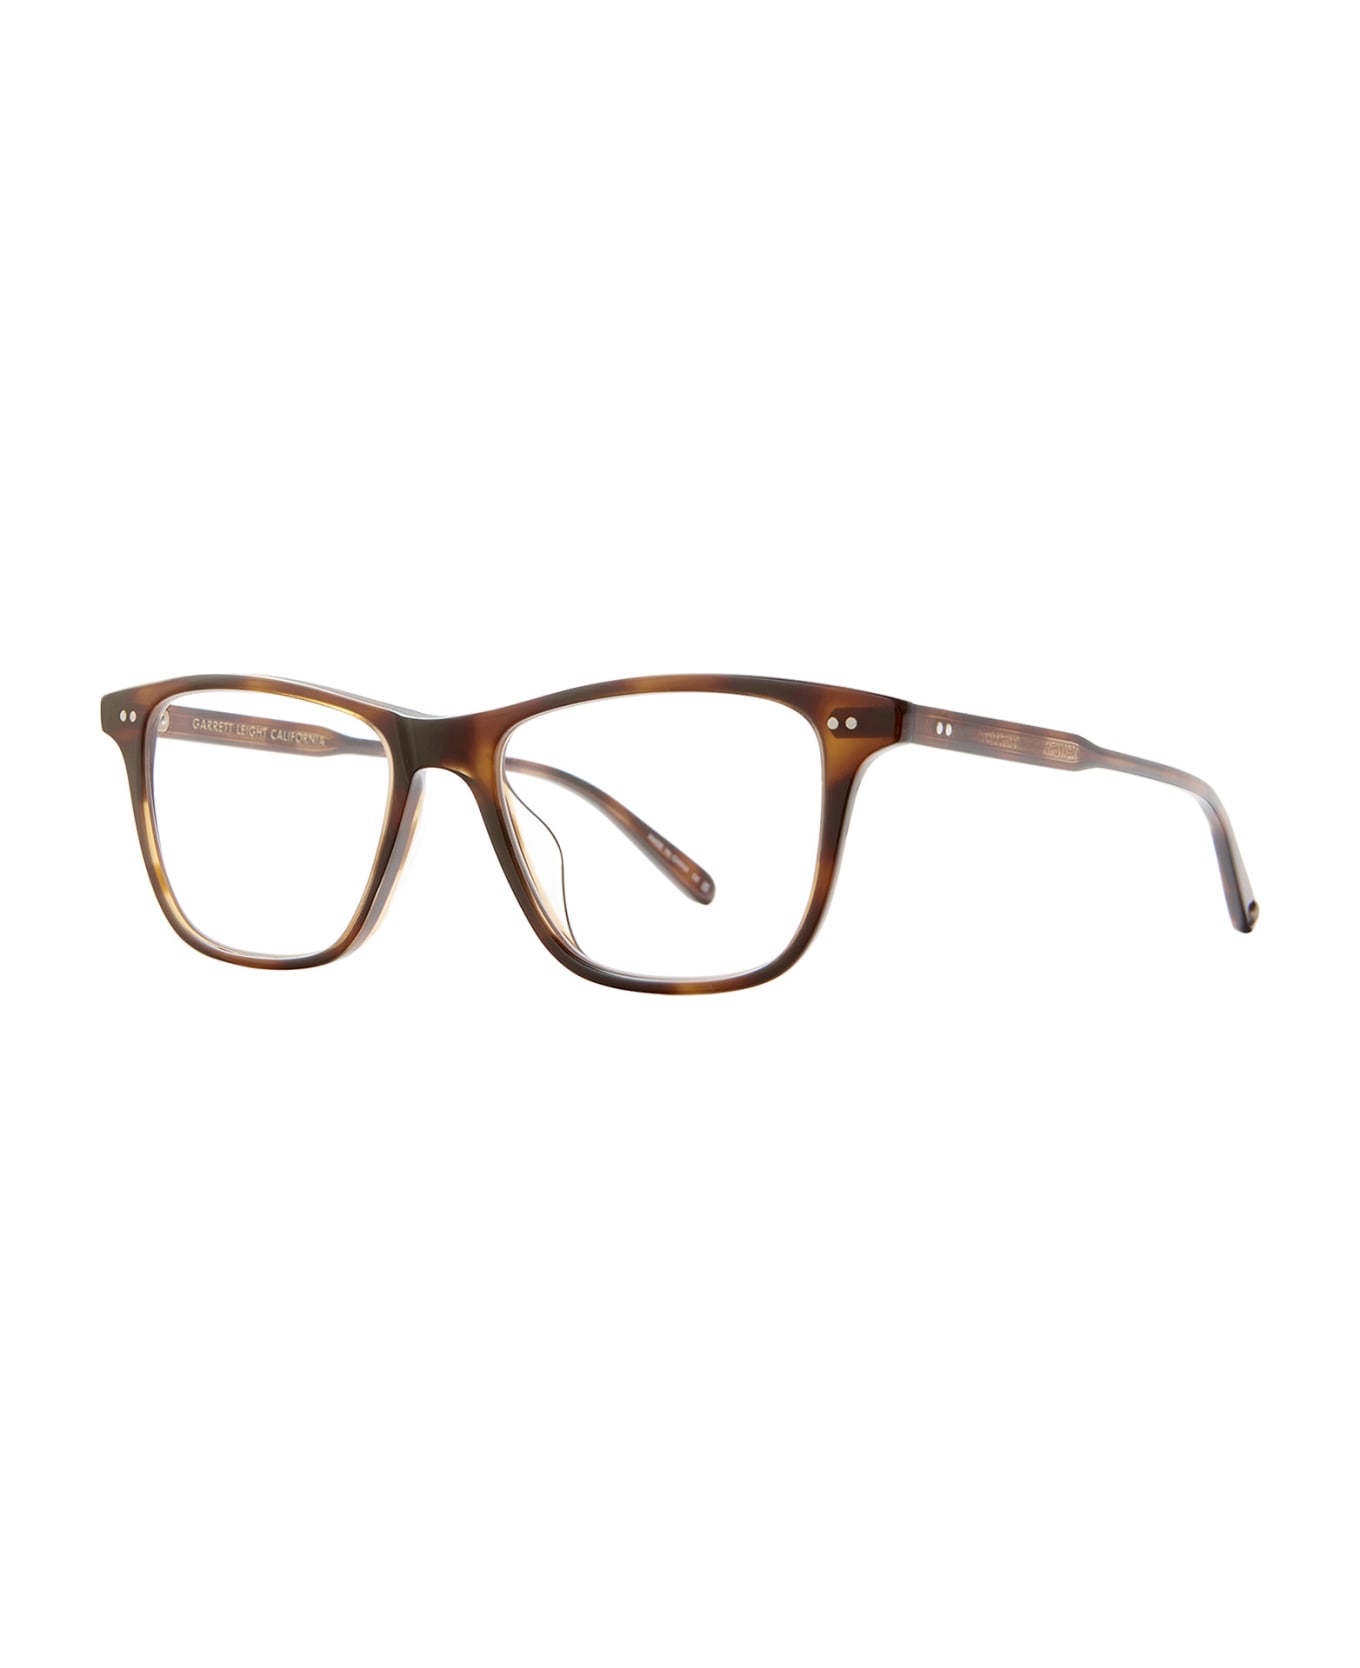 Garrett Leight Hayes Spotted Brown Shell Glasses - Spotted Brown Shell アイウェア